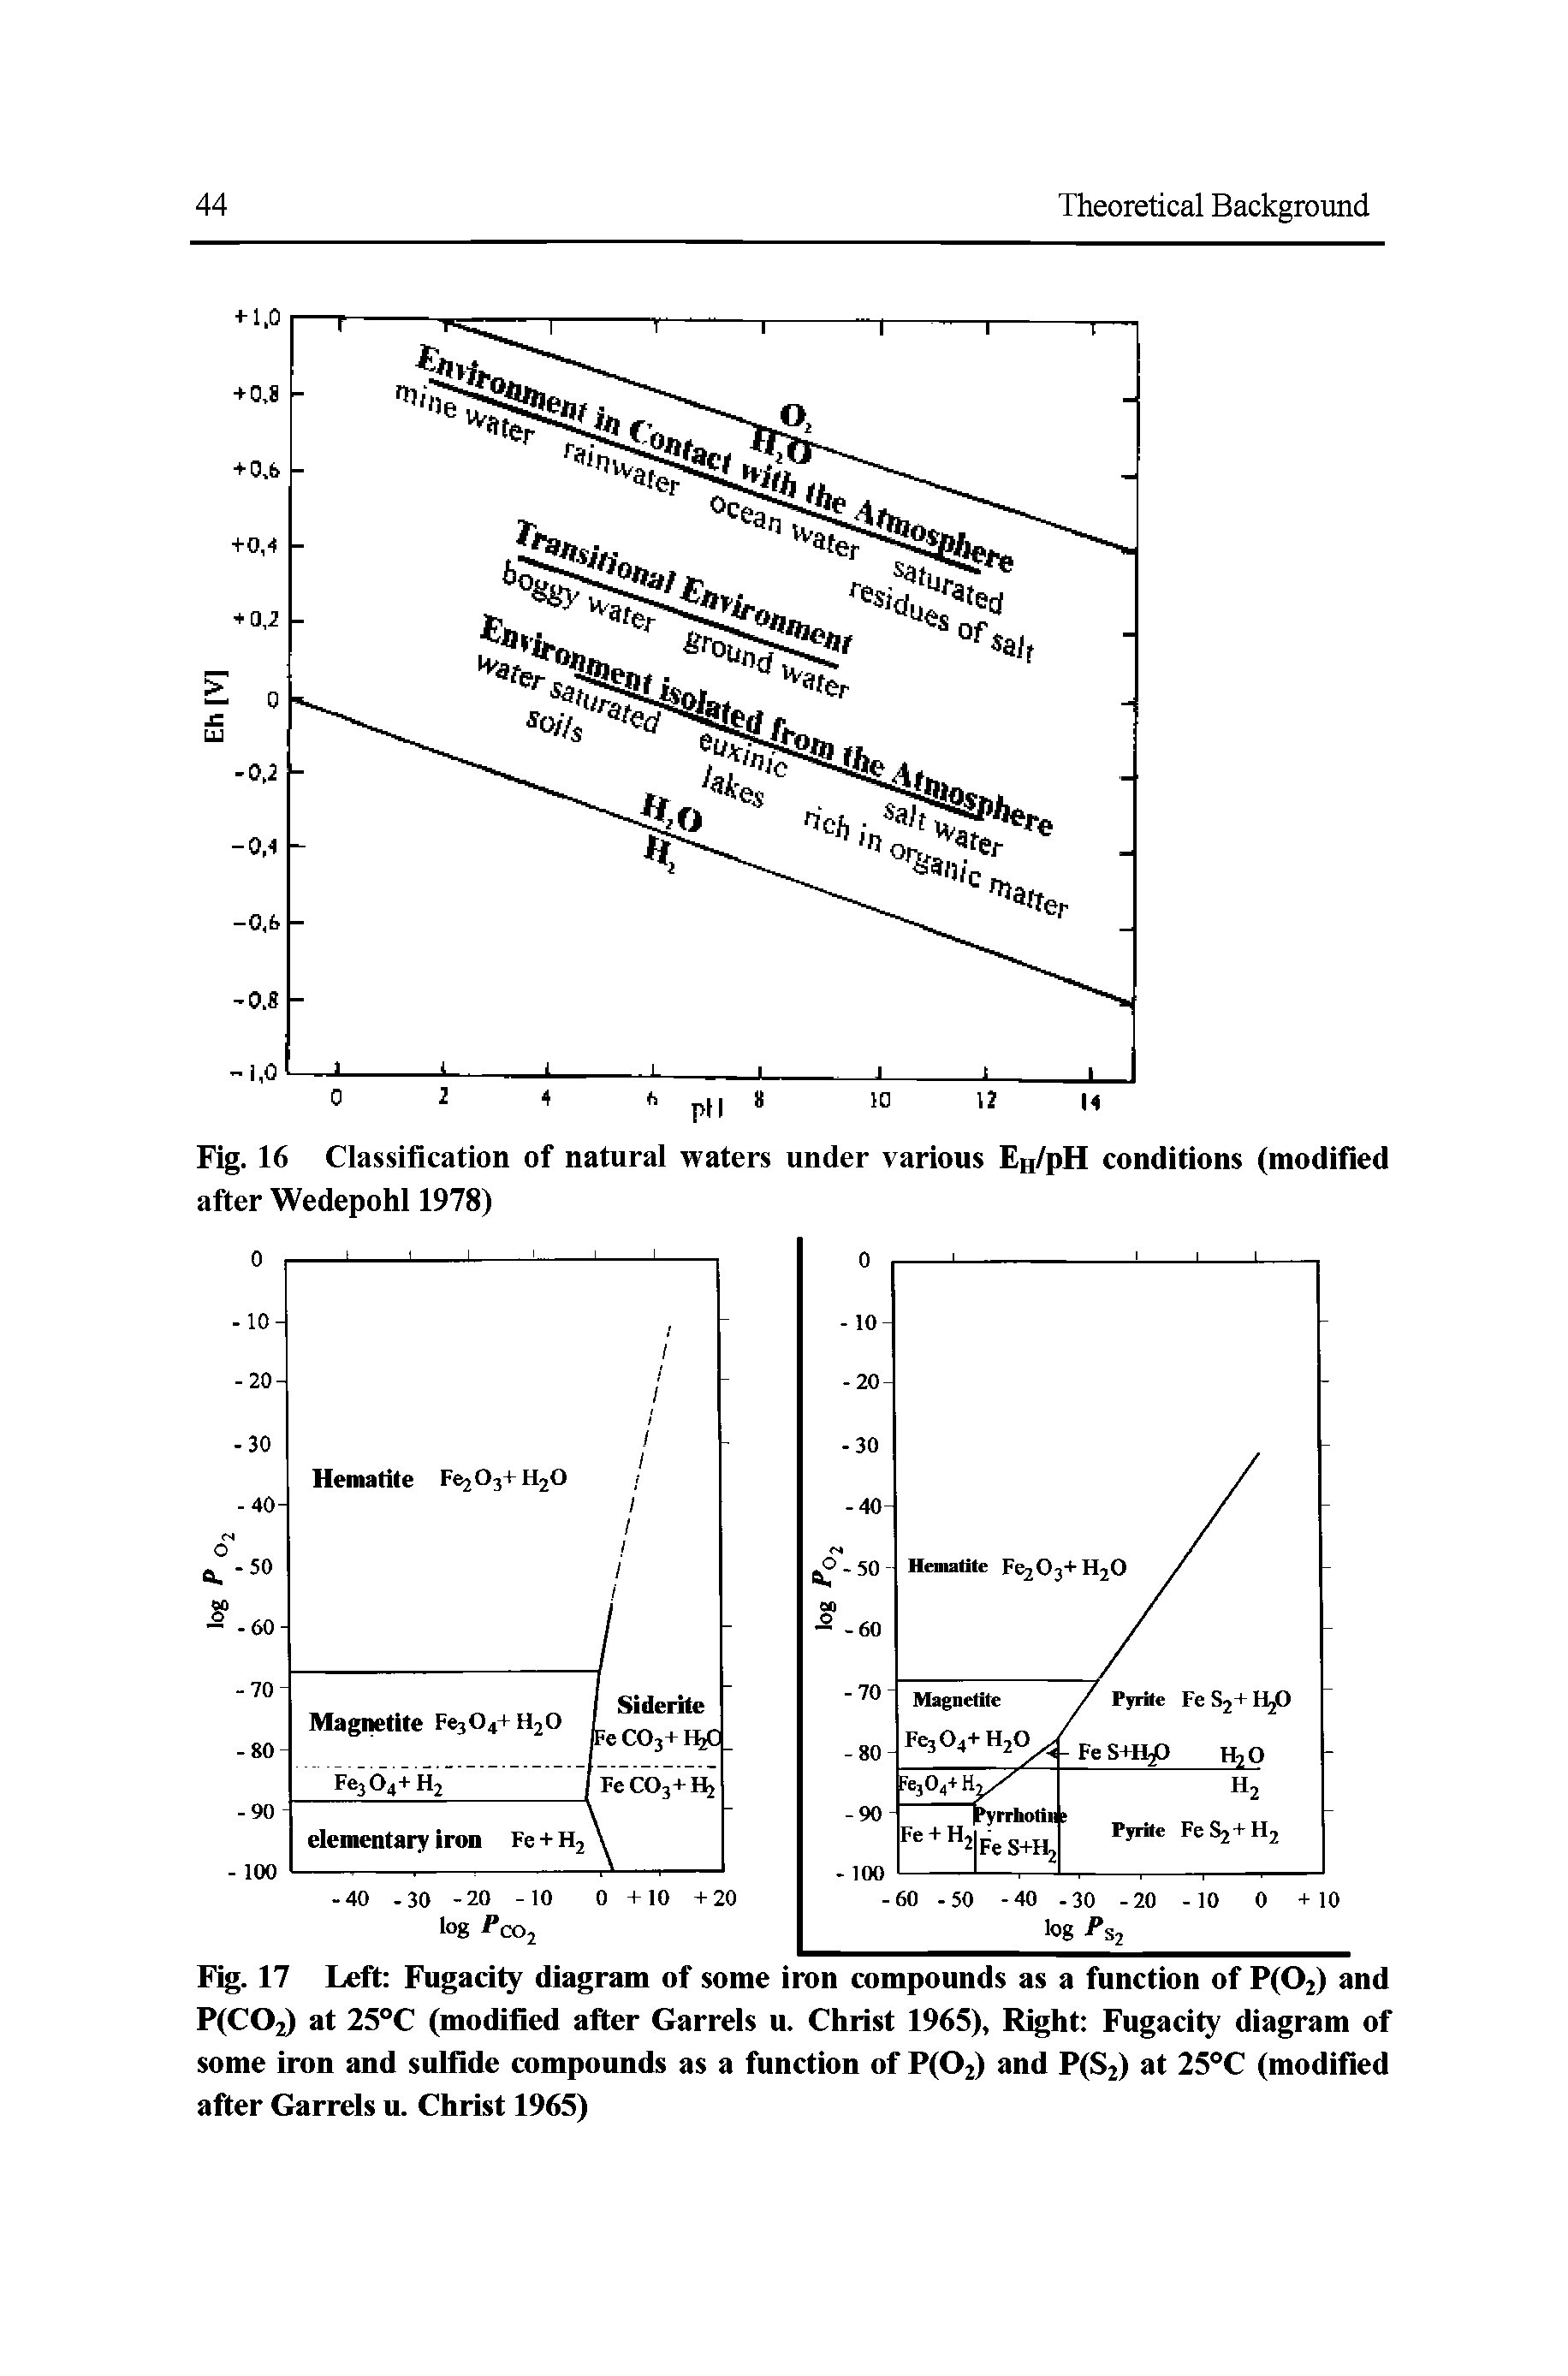 Fig. 17 Left Fugacity diagram of some iron compounds as a function of P(02) and P(COj) at 25°C (modified after Garrels u. Christ 1965), Right Fugacity diagram of some iron and sulfide compounds as a function of P(02) and P(S2) at 25°C (modified after Garrels u. Christ 1965)...